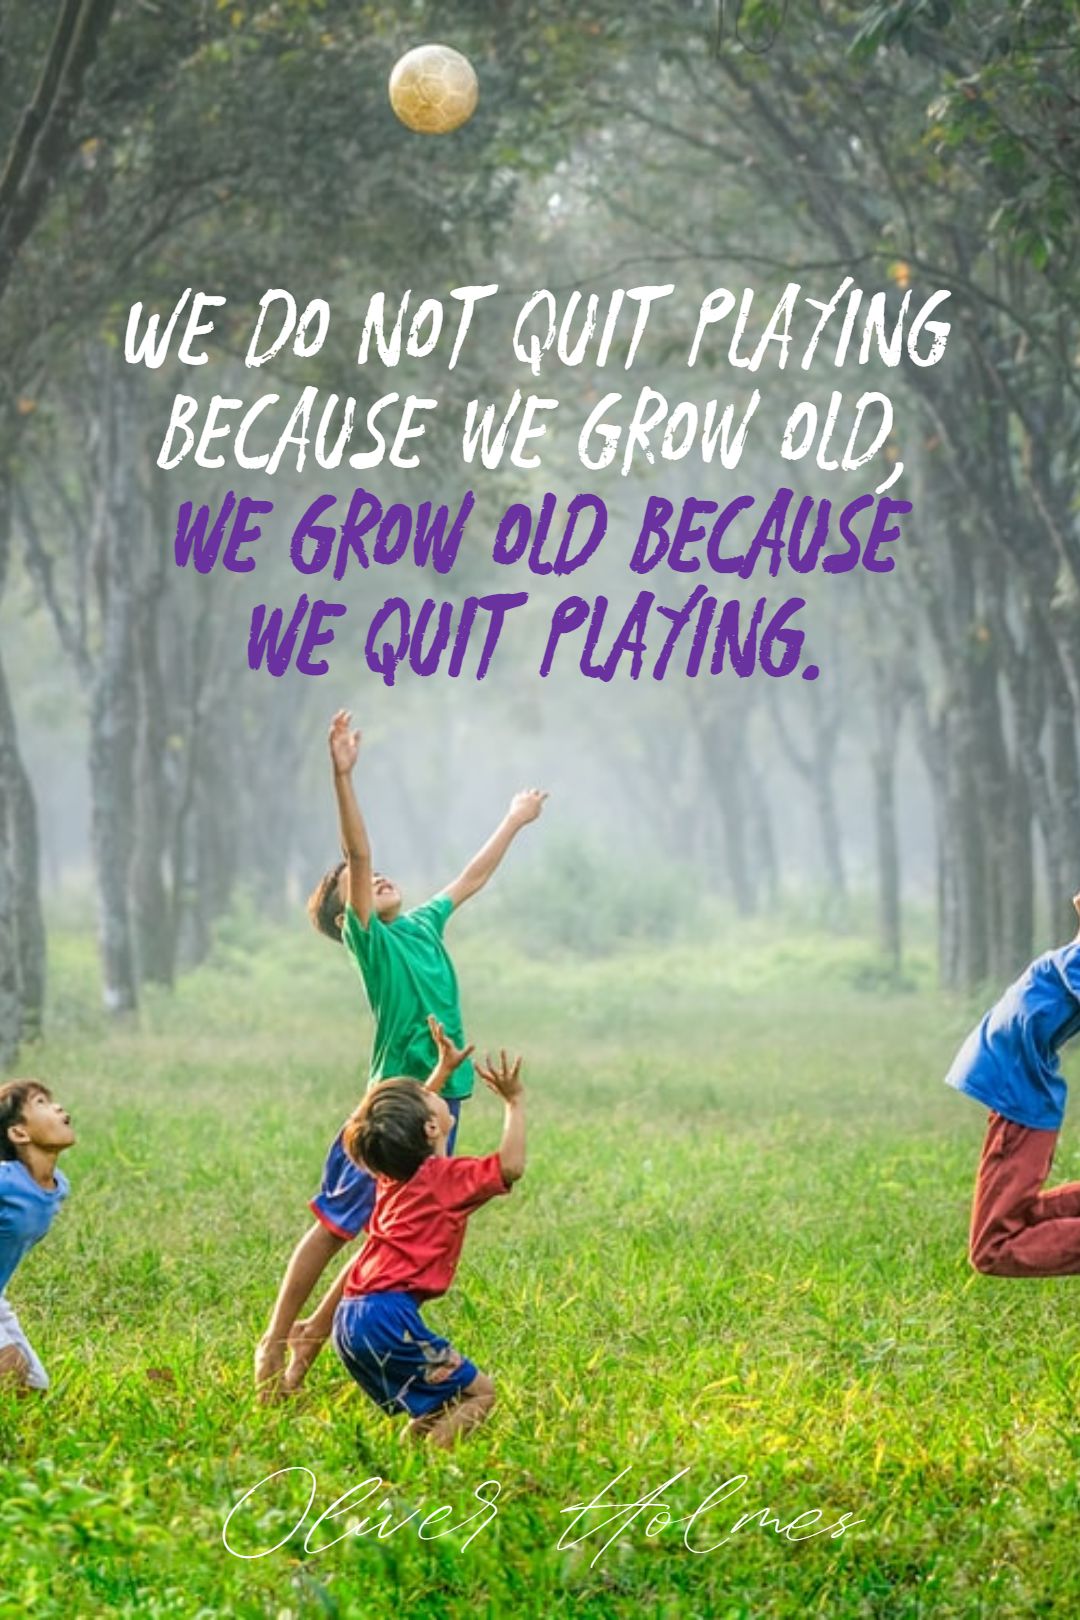 Oliver Holmes’s quote about play. We do not quit playing…